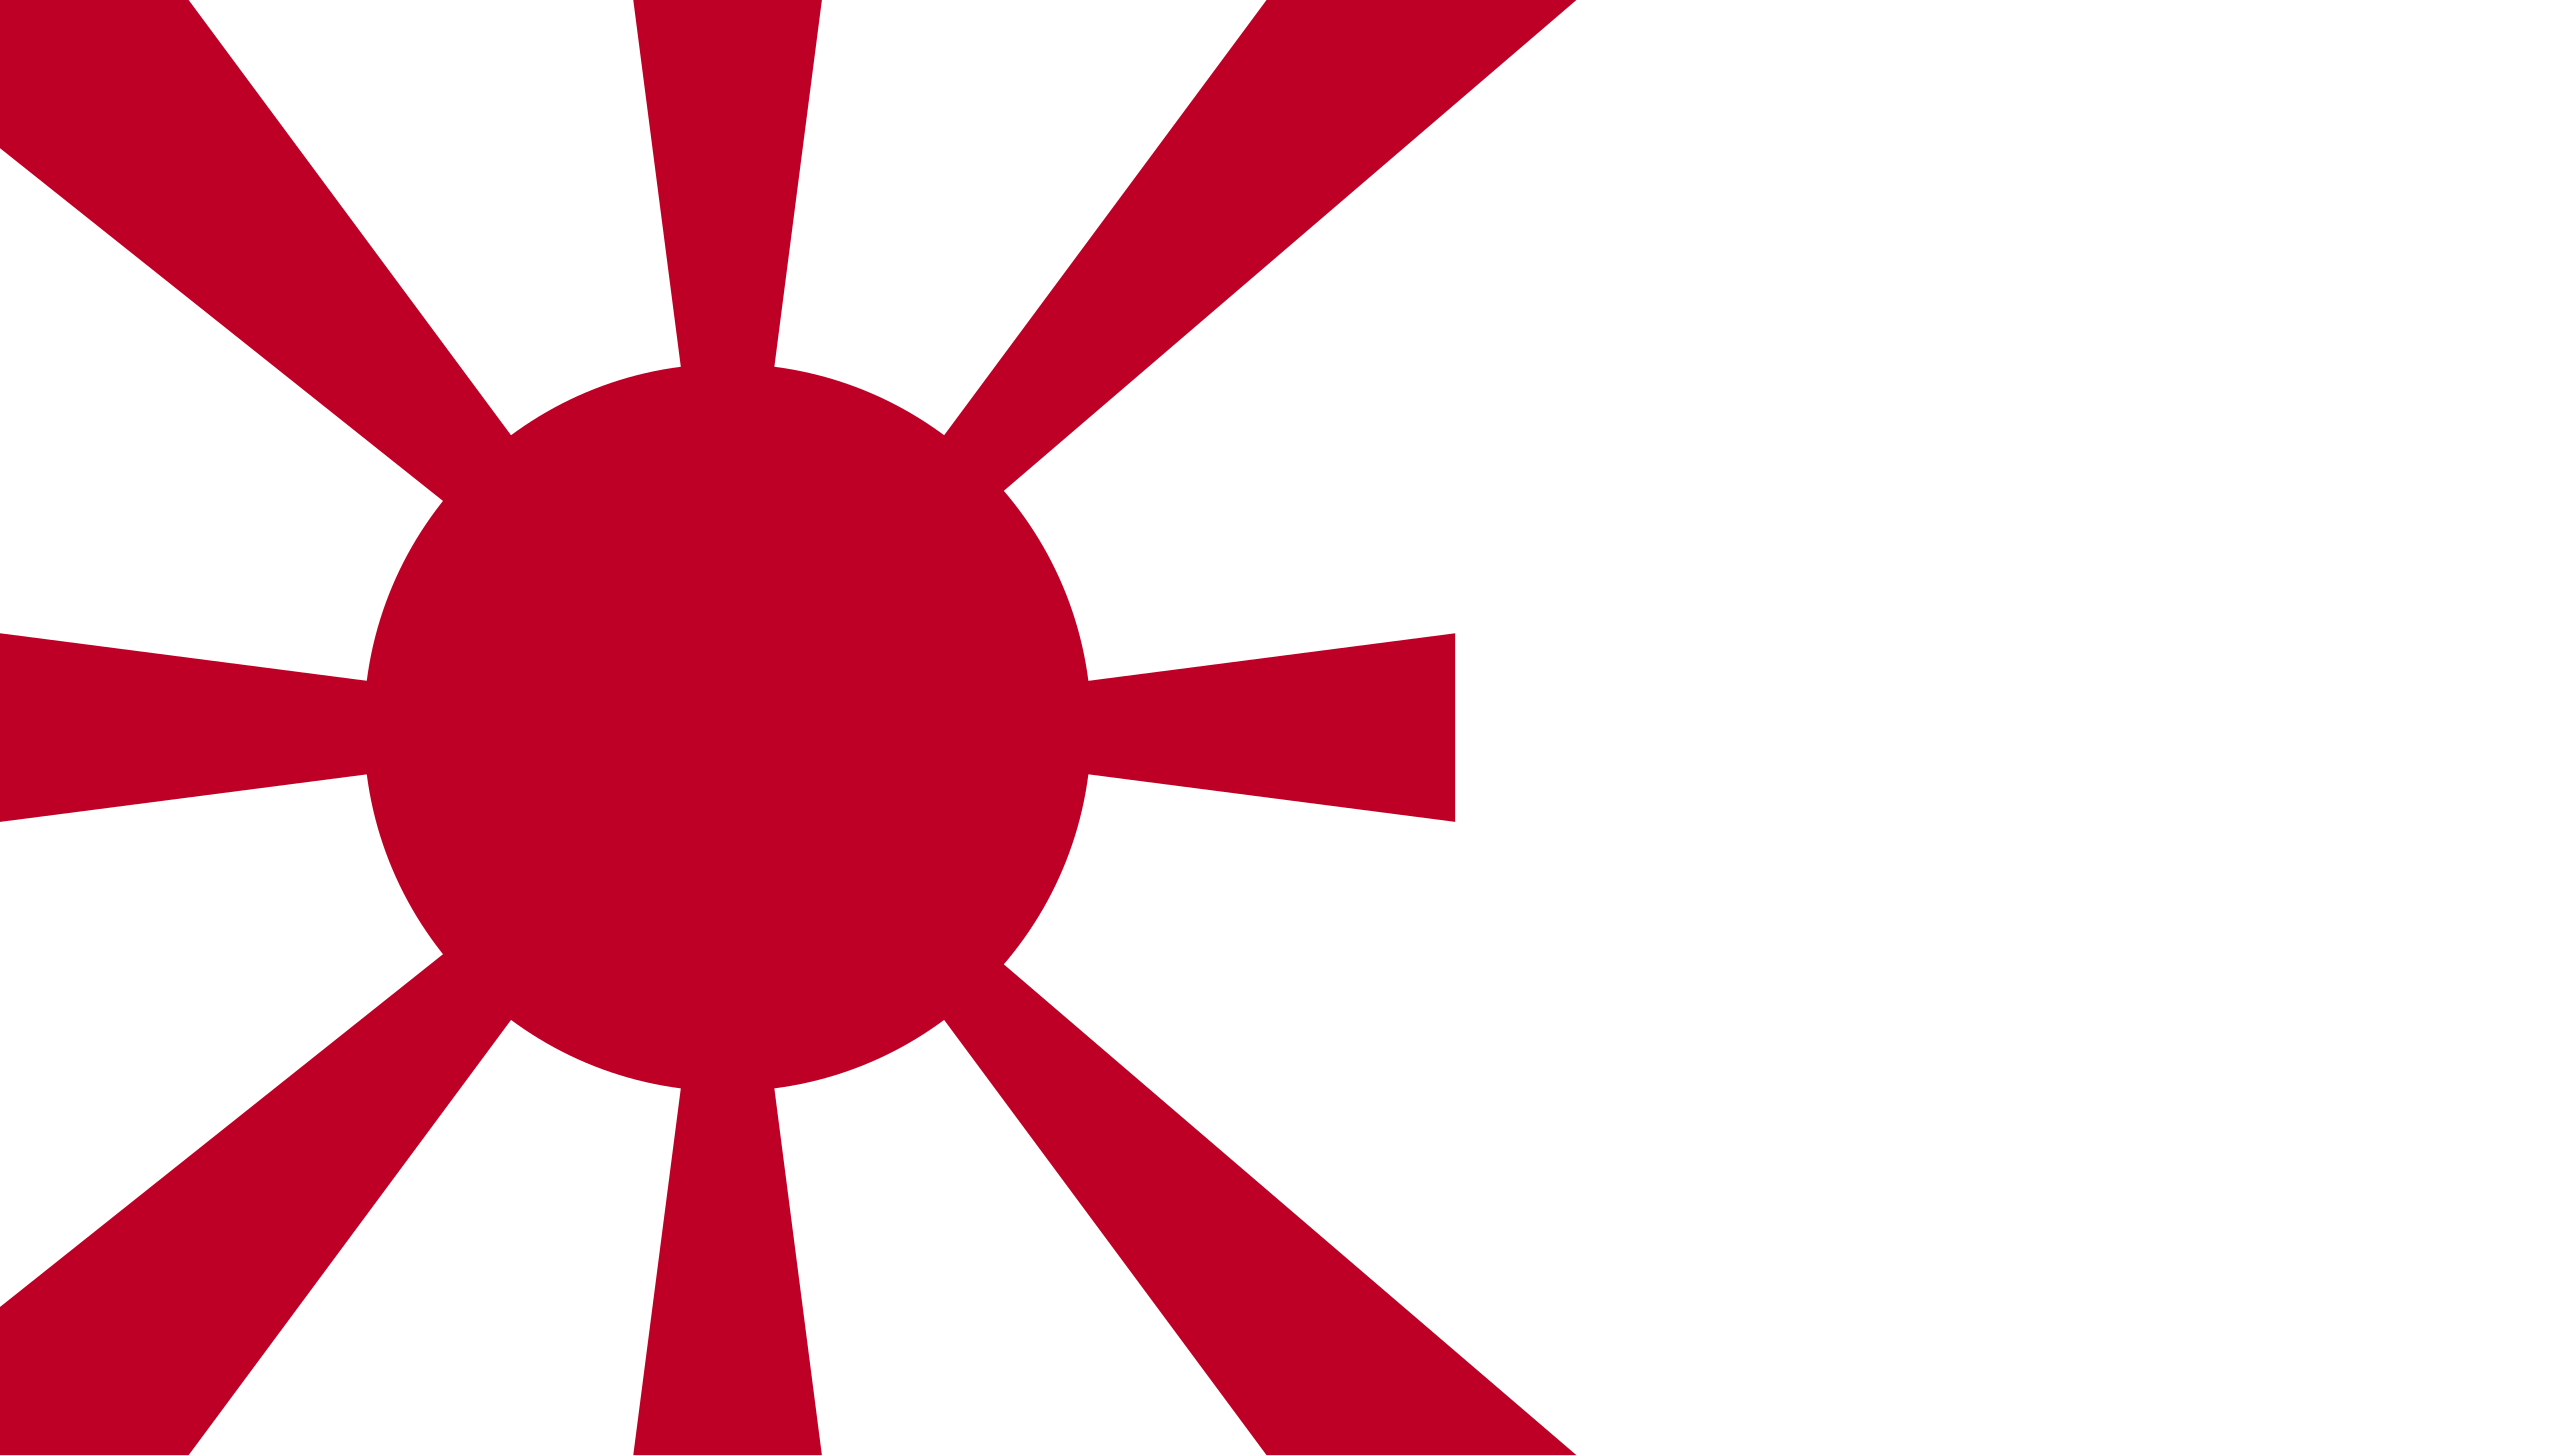 File Standard Of Commodore Of Imperial Japanese Navy Svg 維基百科 自由的百科全書